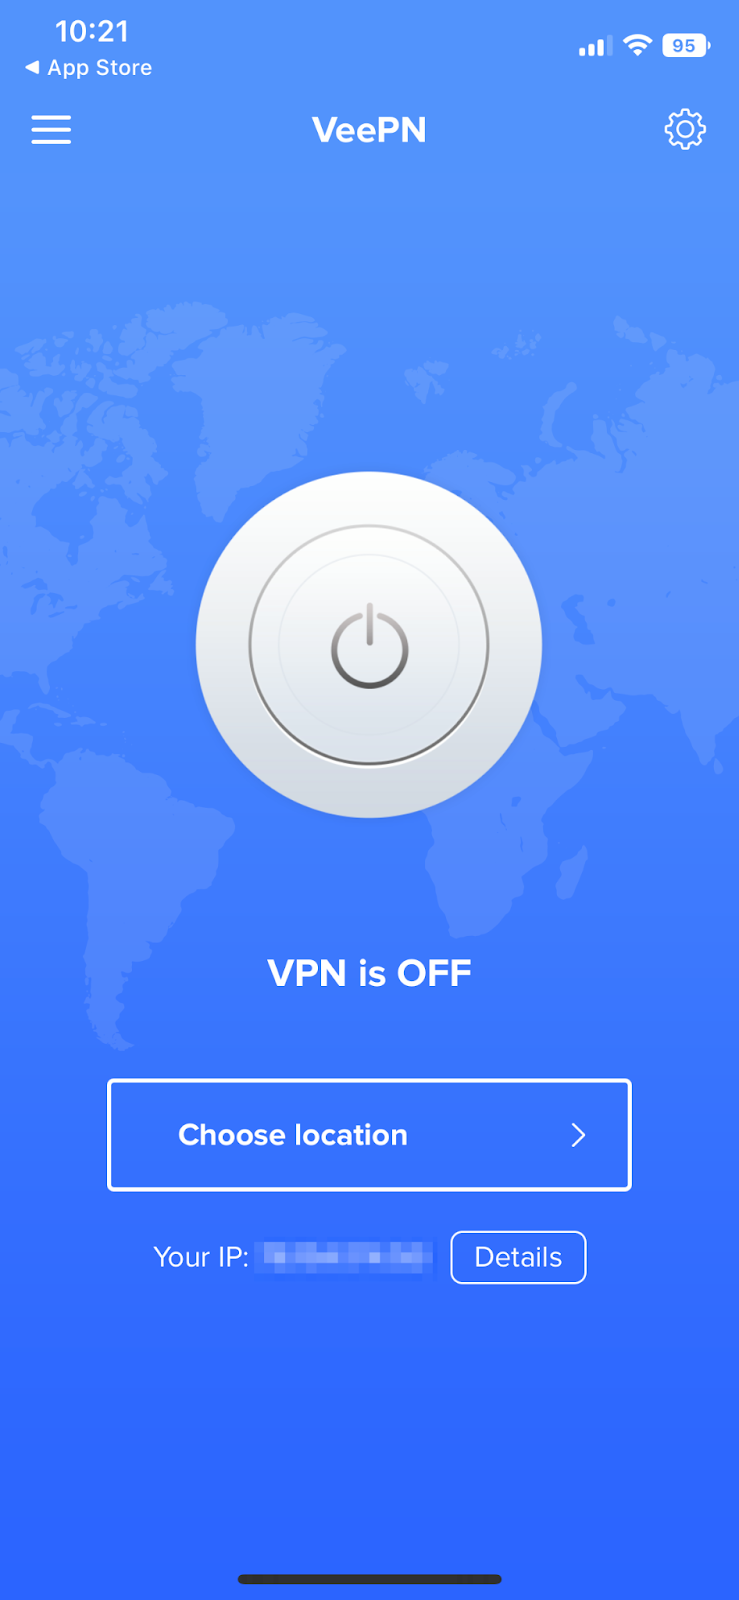 Open the VeePN app on your device